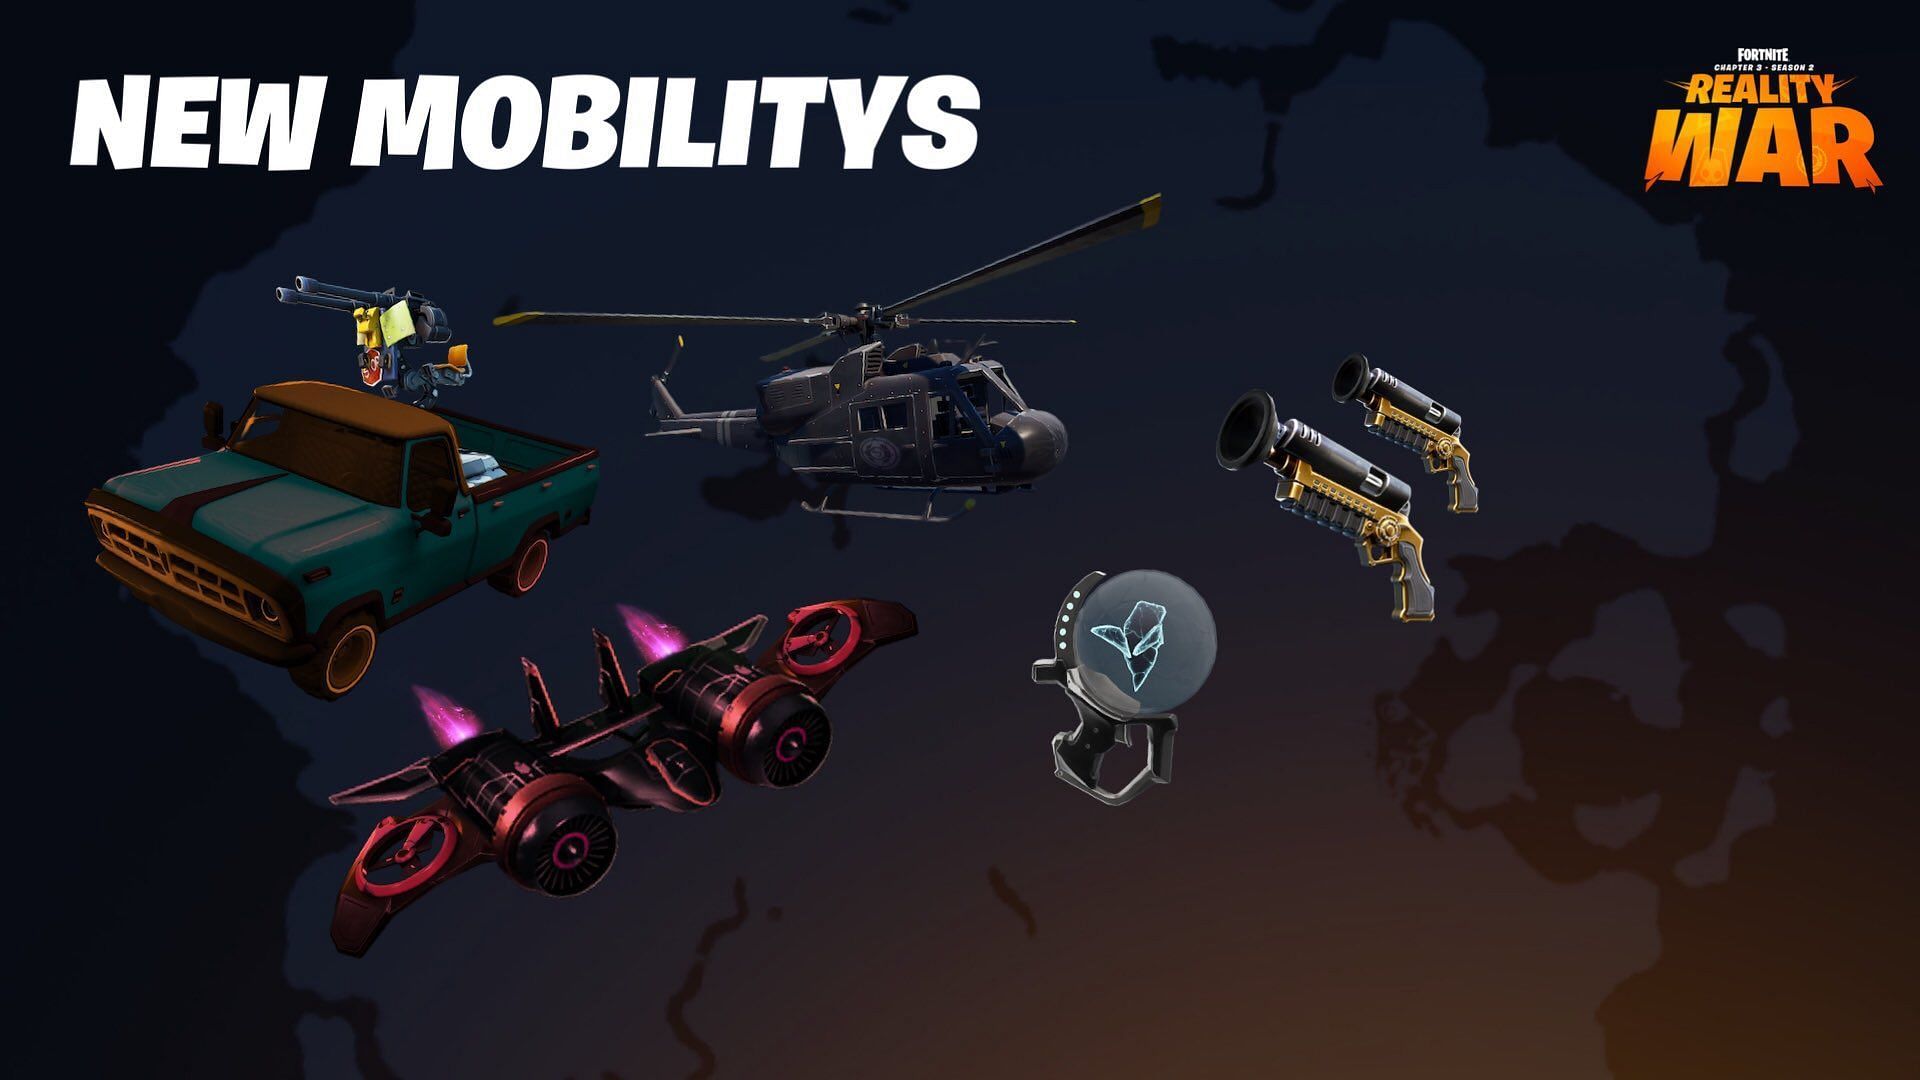 Mobility paves the way forward (Image via FitzyLeakz &amp; PurexGFX)